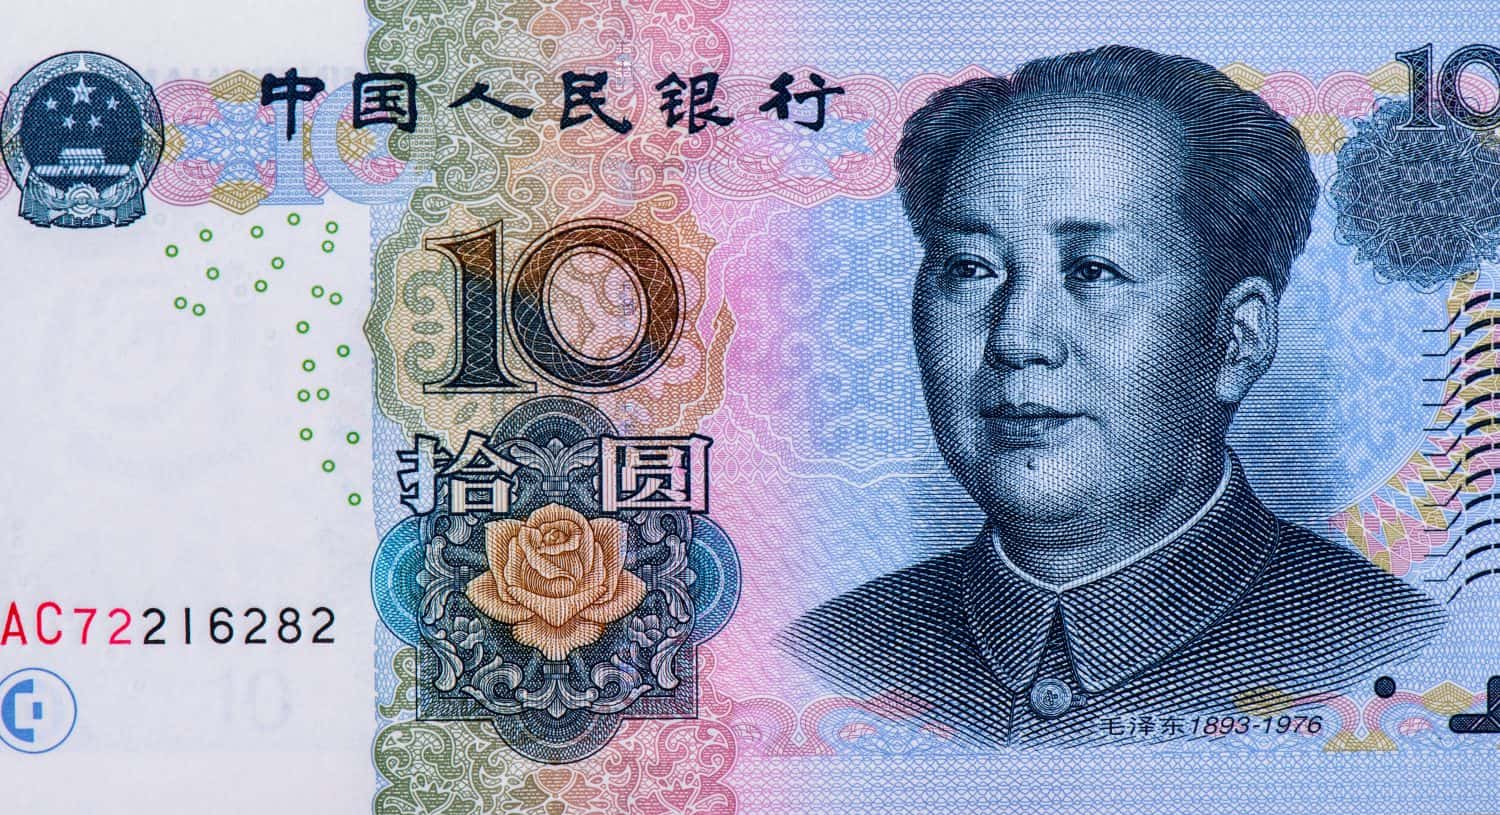 Mao Tse-tung, top leader of the Communist Party of China and the People's Republic of China; Portrait from China 10 Yuan 2005 Banknotes.